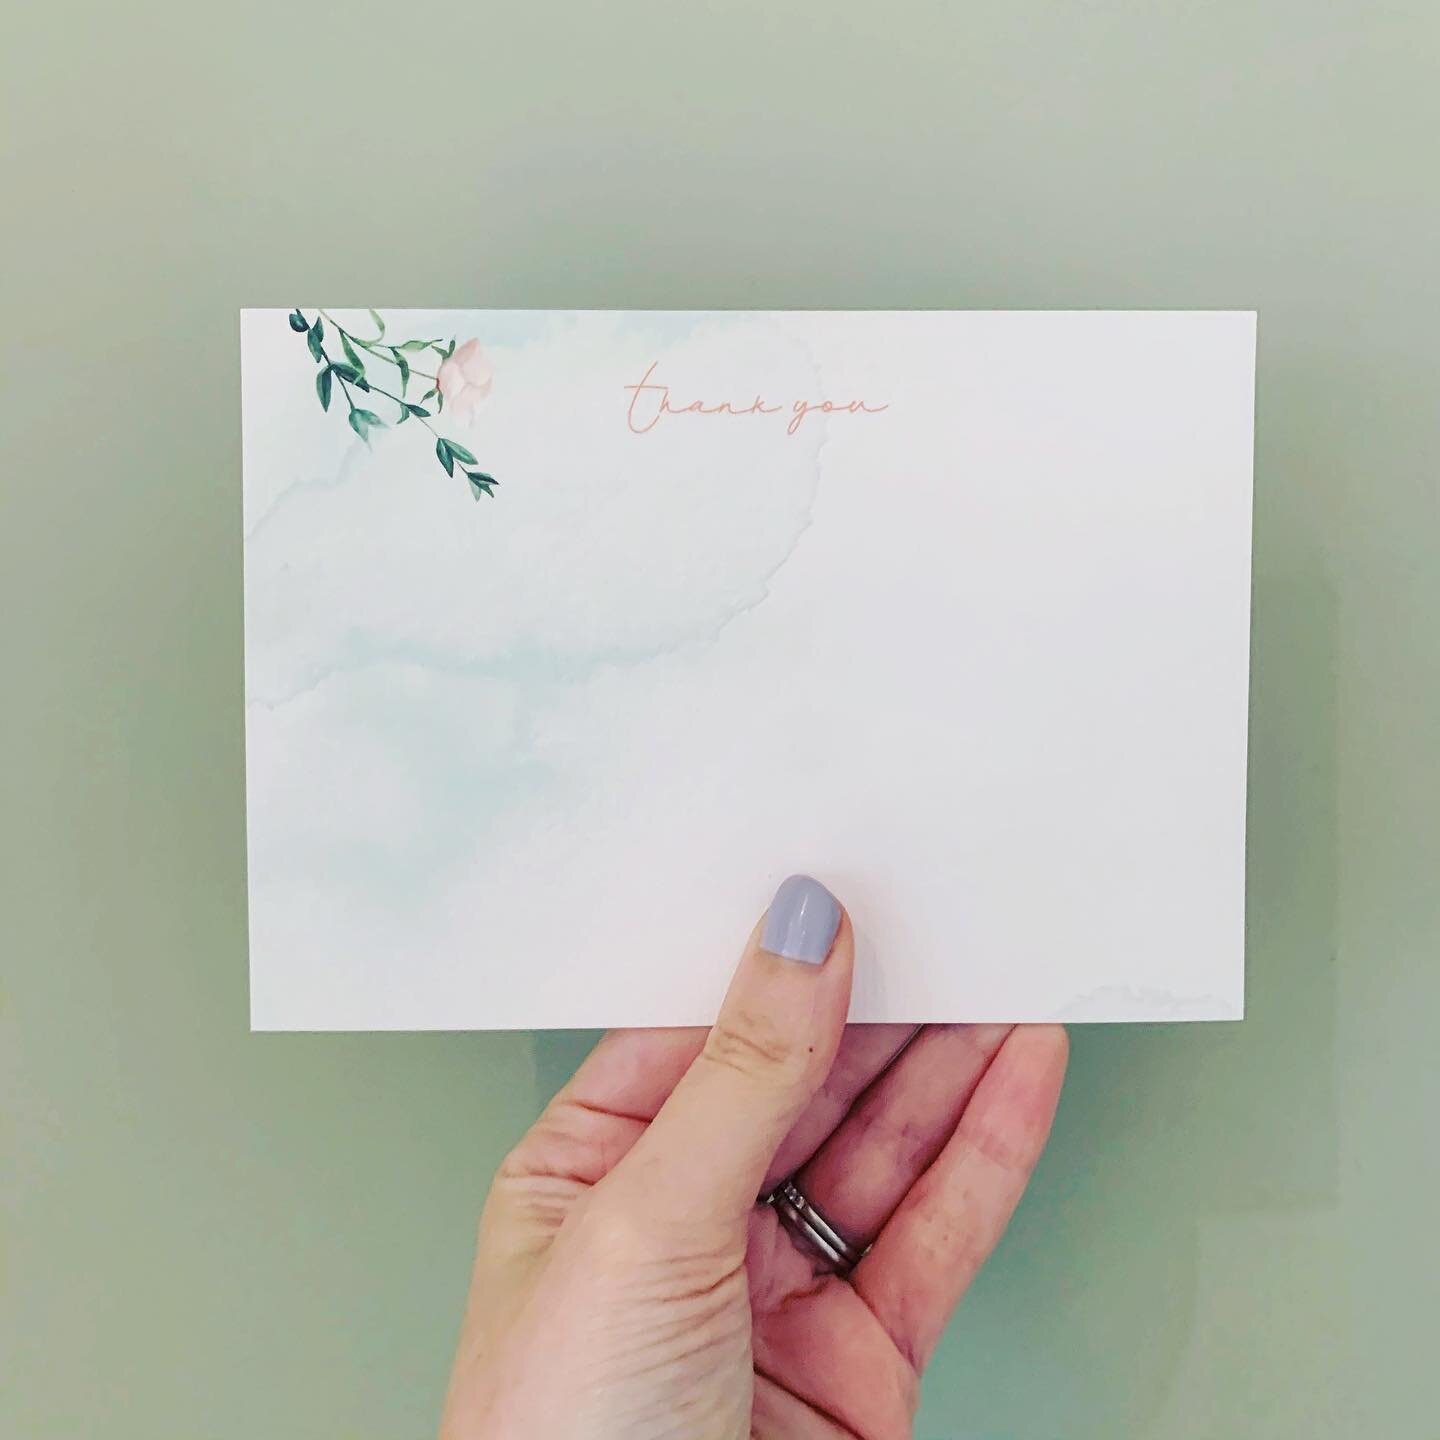 We can&rsquo;t wait to share this full suite with you once the invites come out. But for now here&rsquo;s a little teaser 😉
.
.
.
#thankyou #thankyoucards #weddingthankyou #weddingstationery #weddingsuite #watercolourinvitations #proudlyprinted #liv